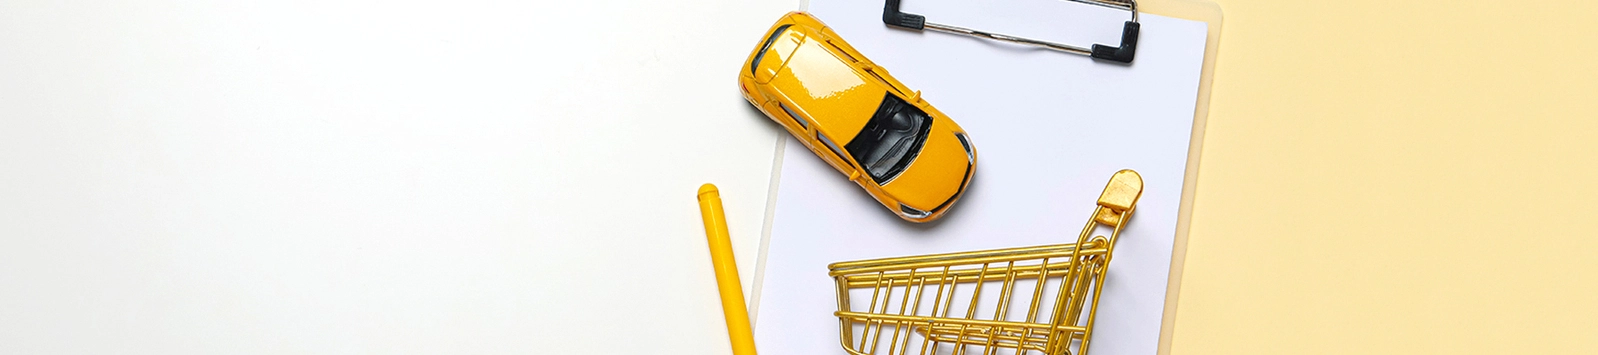 Concept of car purchase with toy car